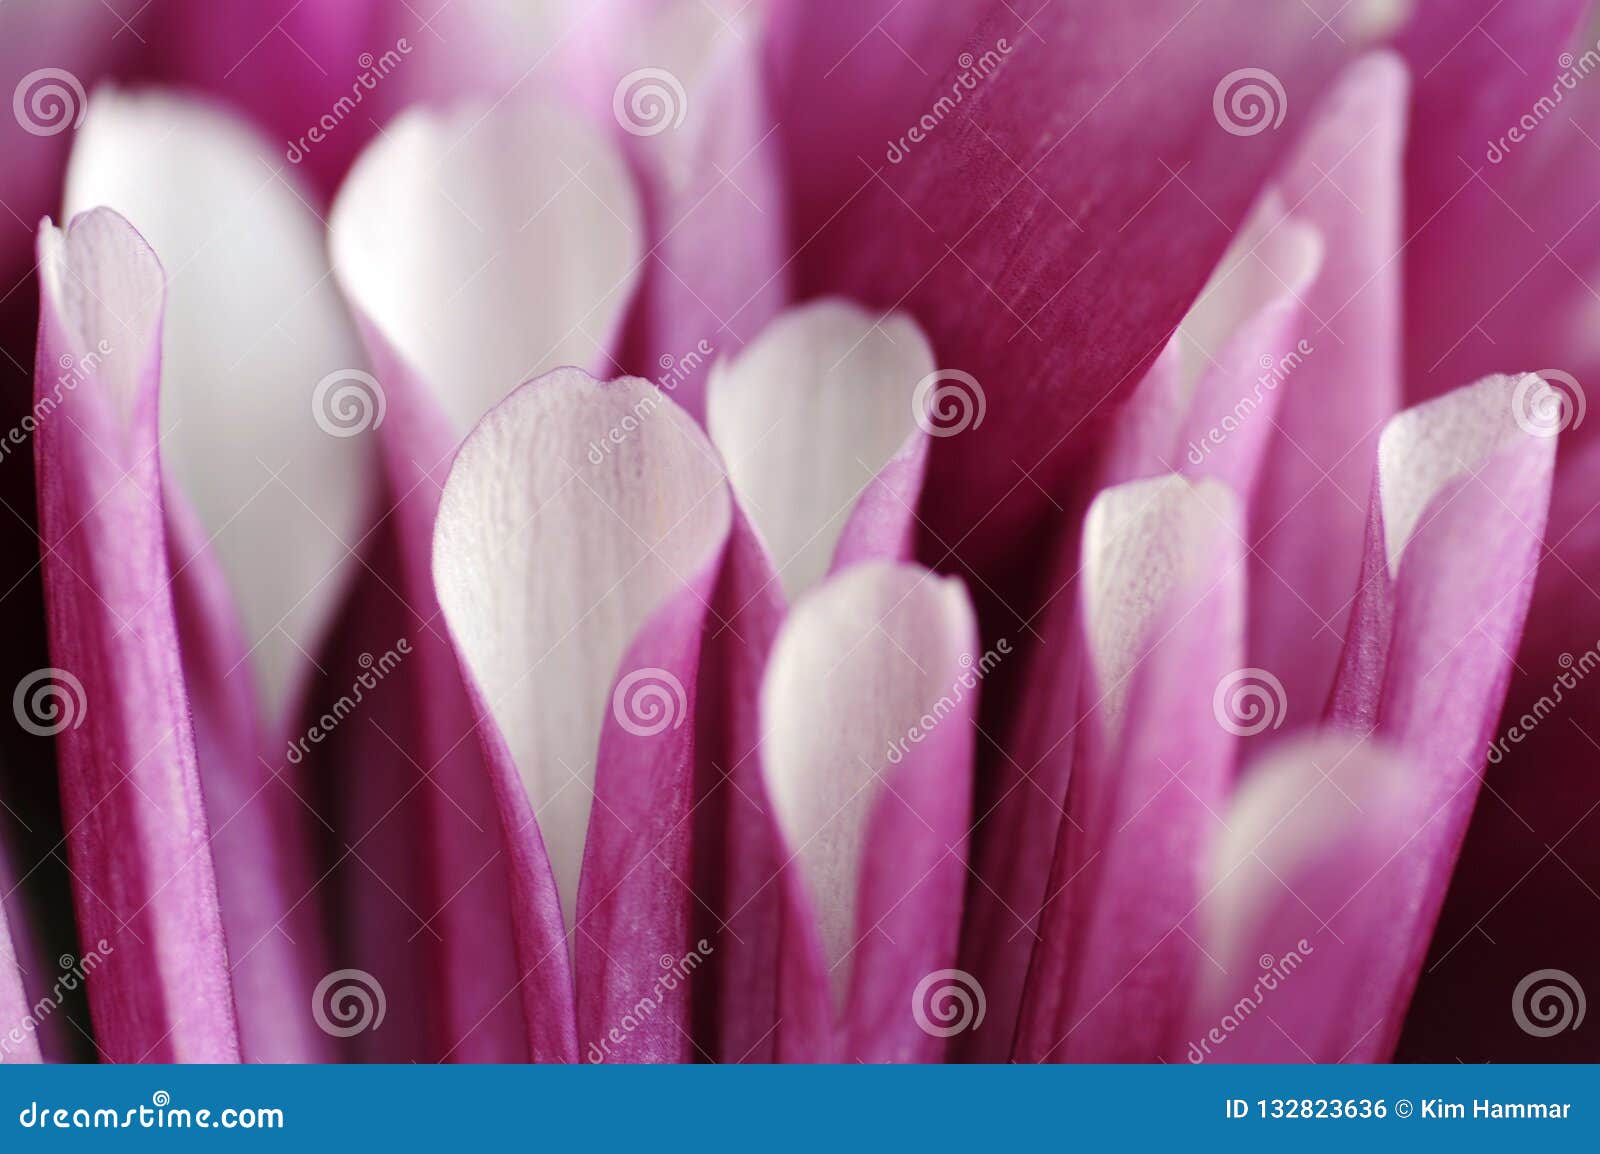 A Macro View Of A Blooming Chrysanthemum Or Pom Pom Mum Petal Tips Stock Photo Image Of Daytime Bloom 132823636